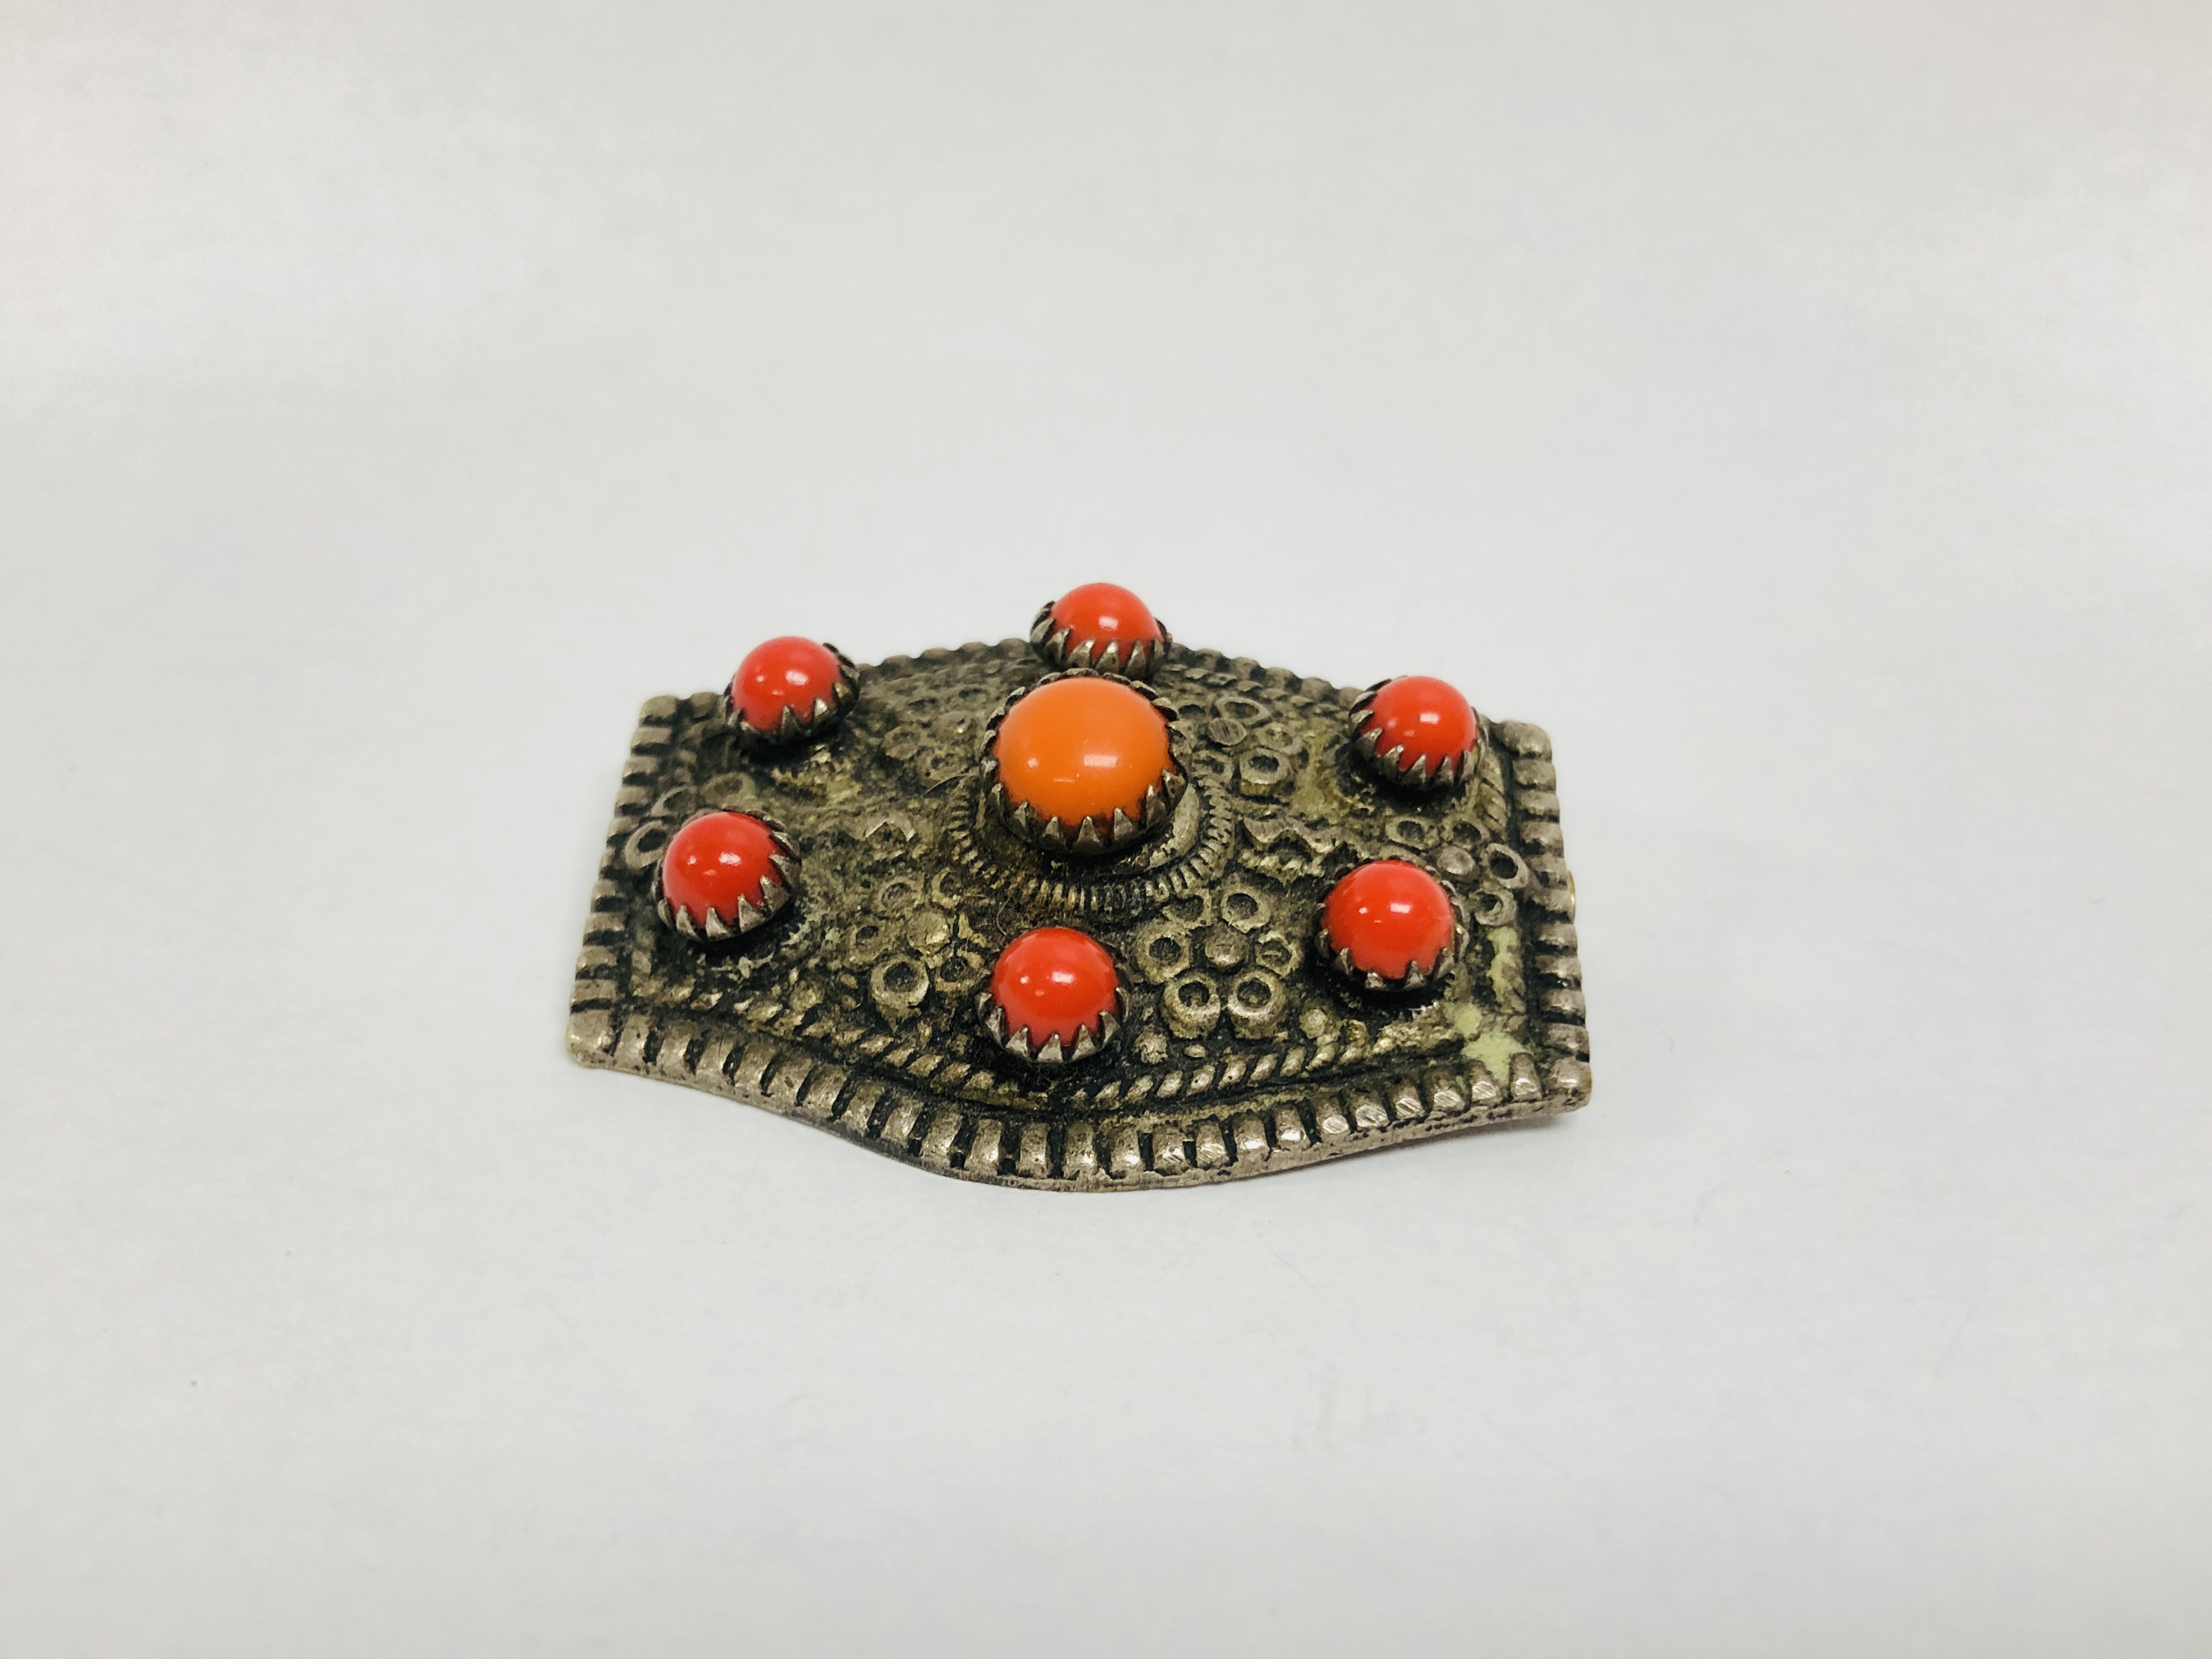 5 X WHITE METAL SCOTTISH CELTIC DESIGN BROOCHES SET WITH AGATE AND VARIOUS HARD STONES - Image 10 of 20